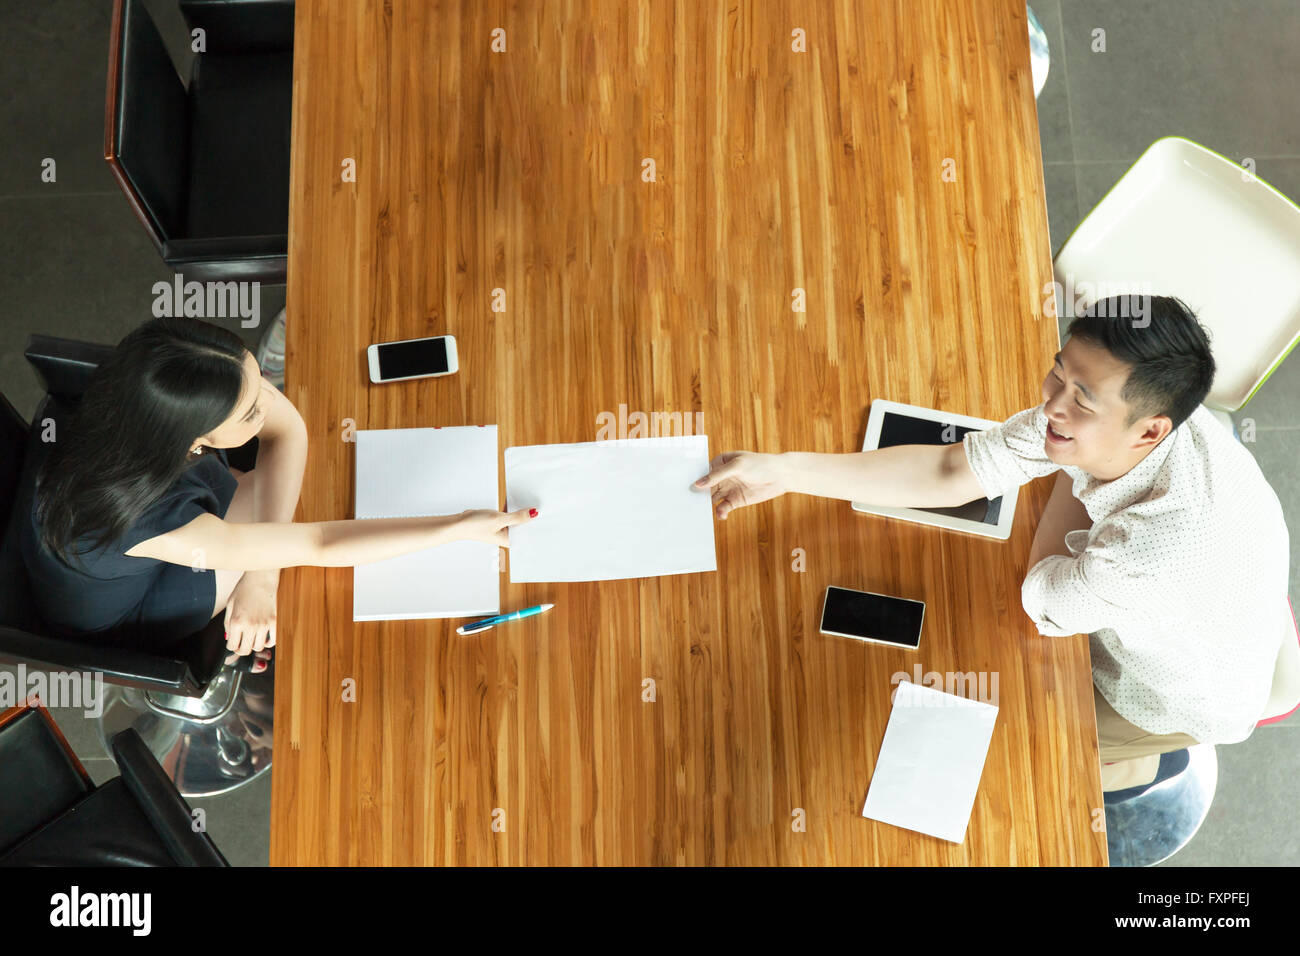 Top View of Business People sitting behind meeting desk, handing out documents Stock Photo